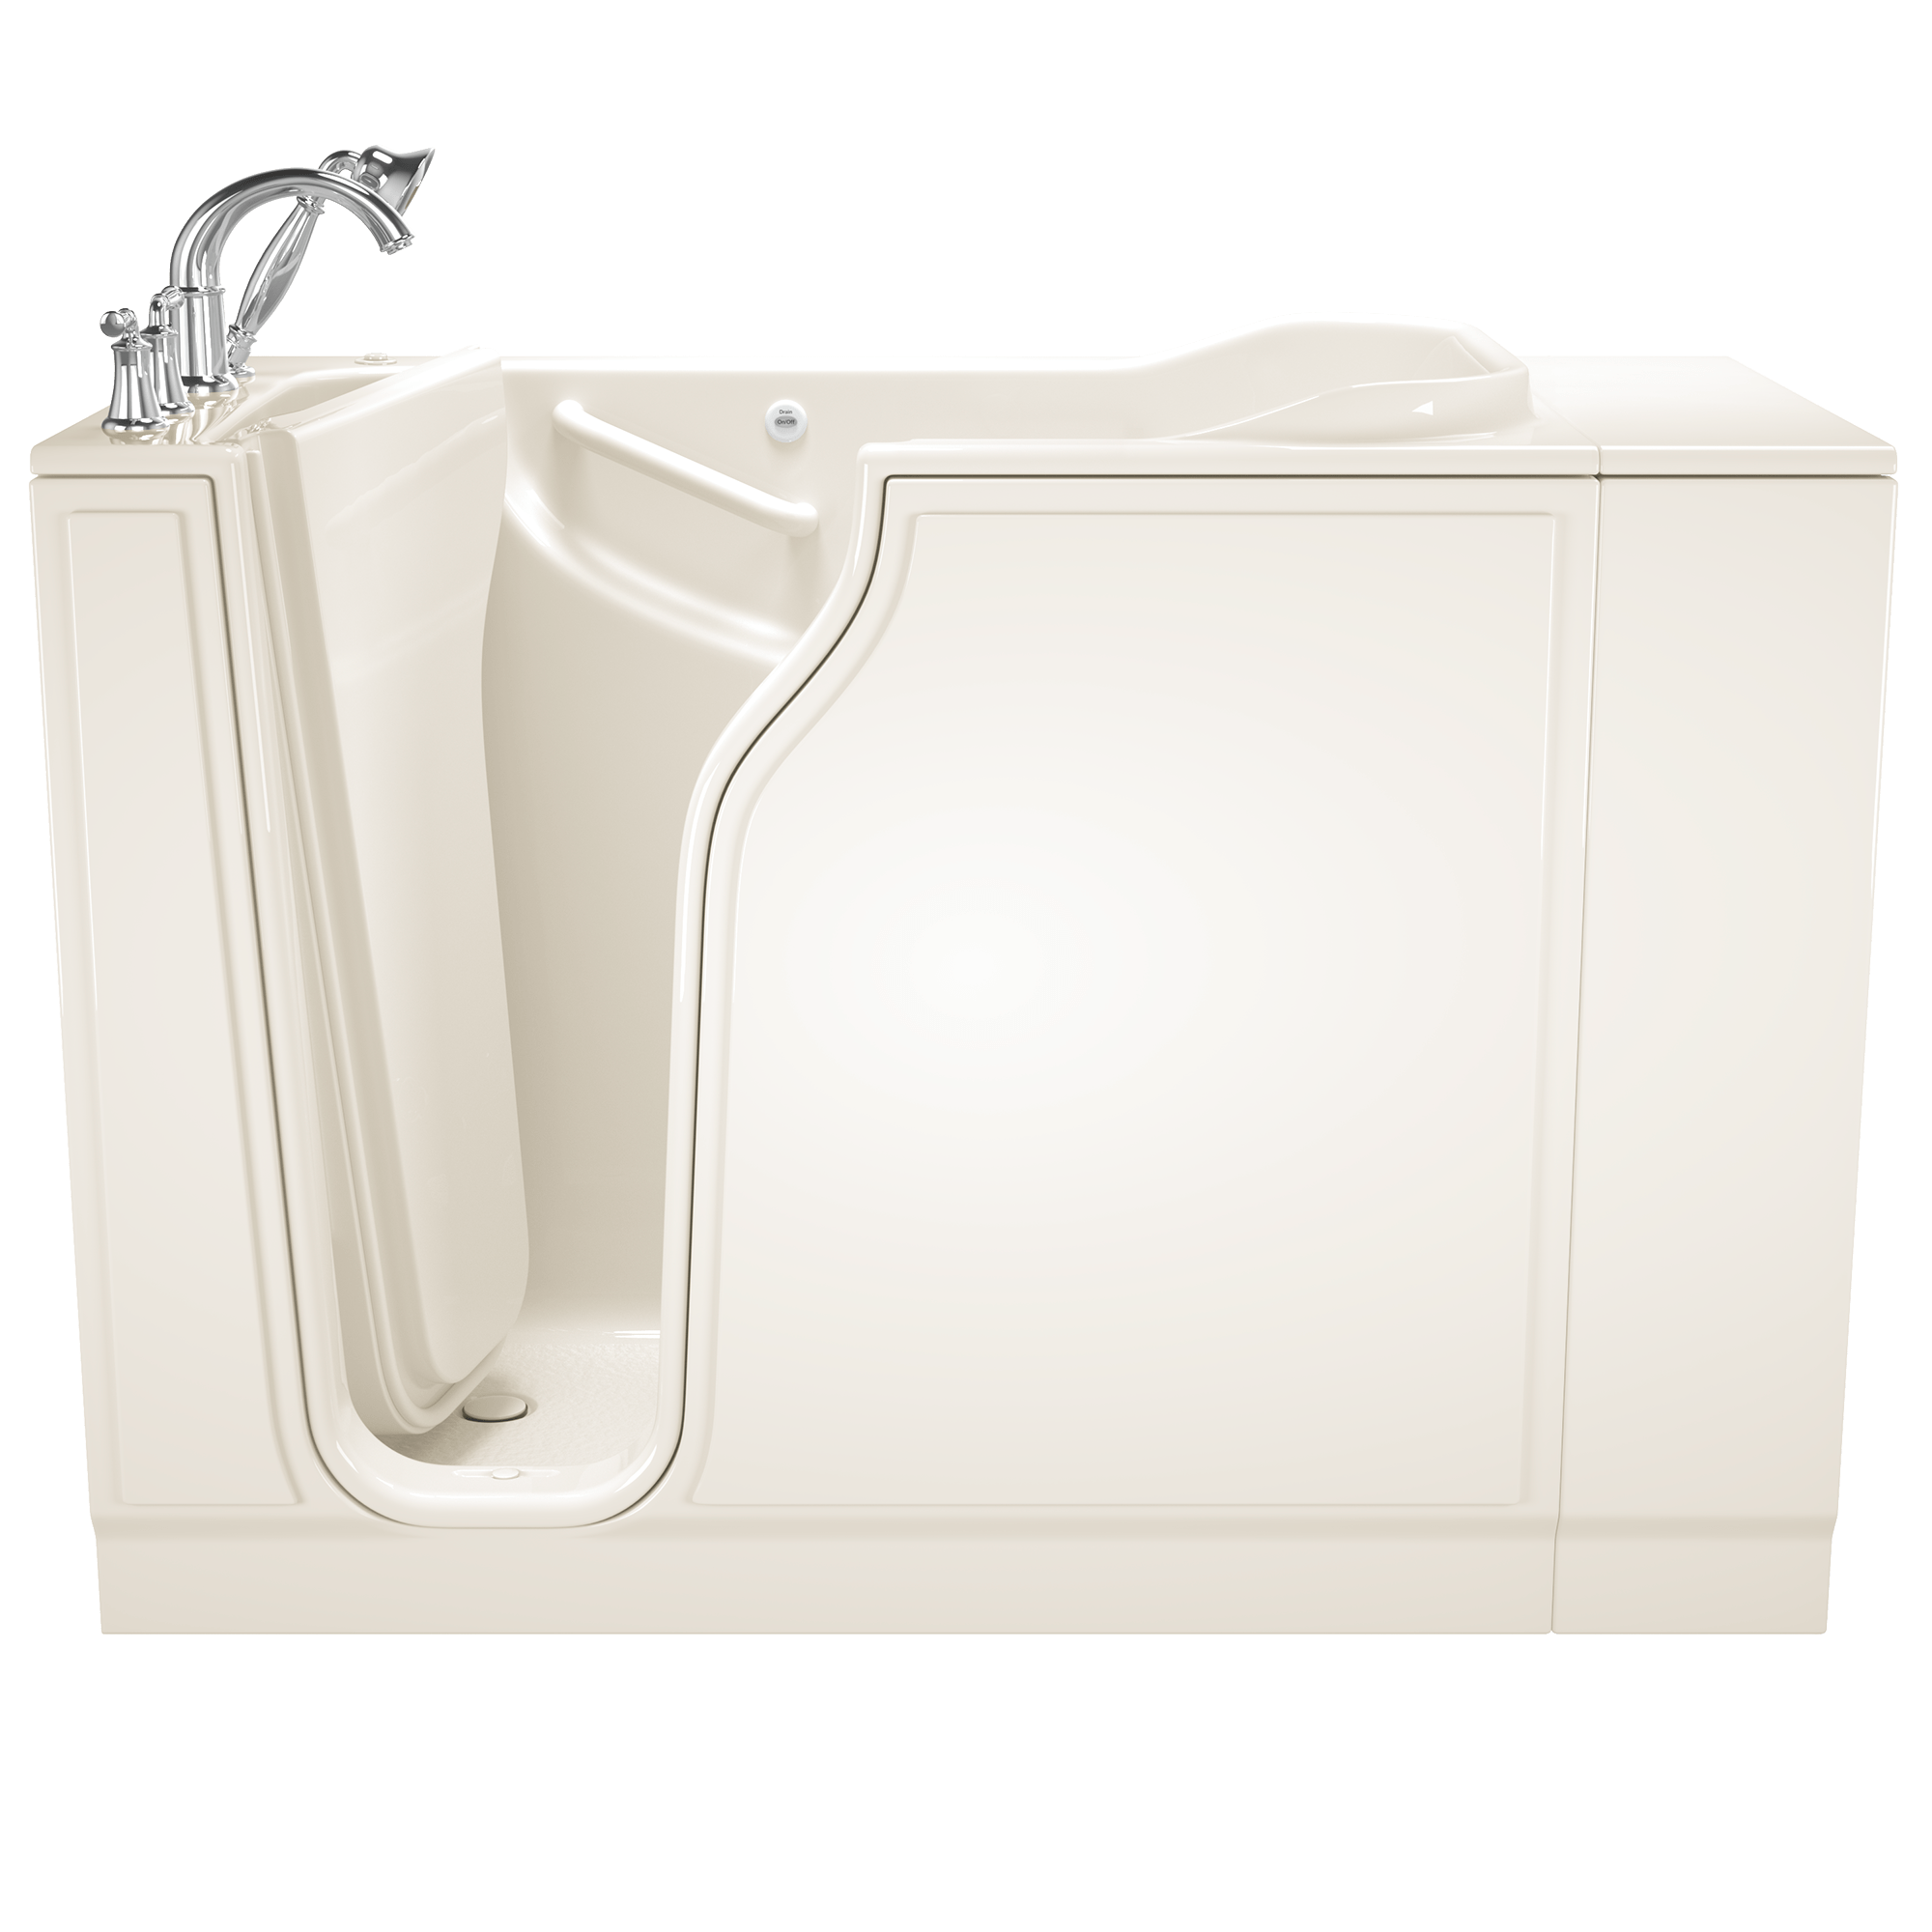 Gelcoat Value Series 30x52 Inch Walk In Bathtub with Whirlpool Massage System   Left Hand Door and Drain WIB LINEN